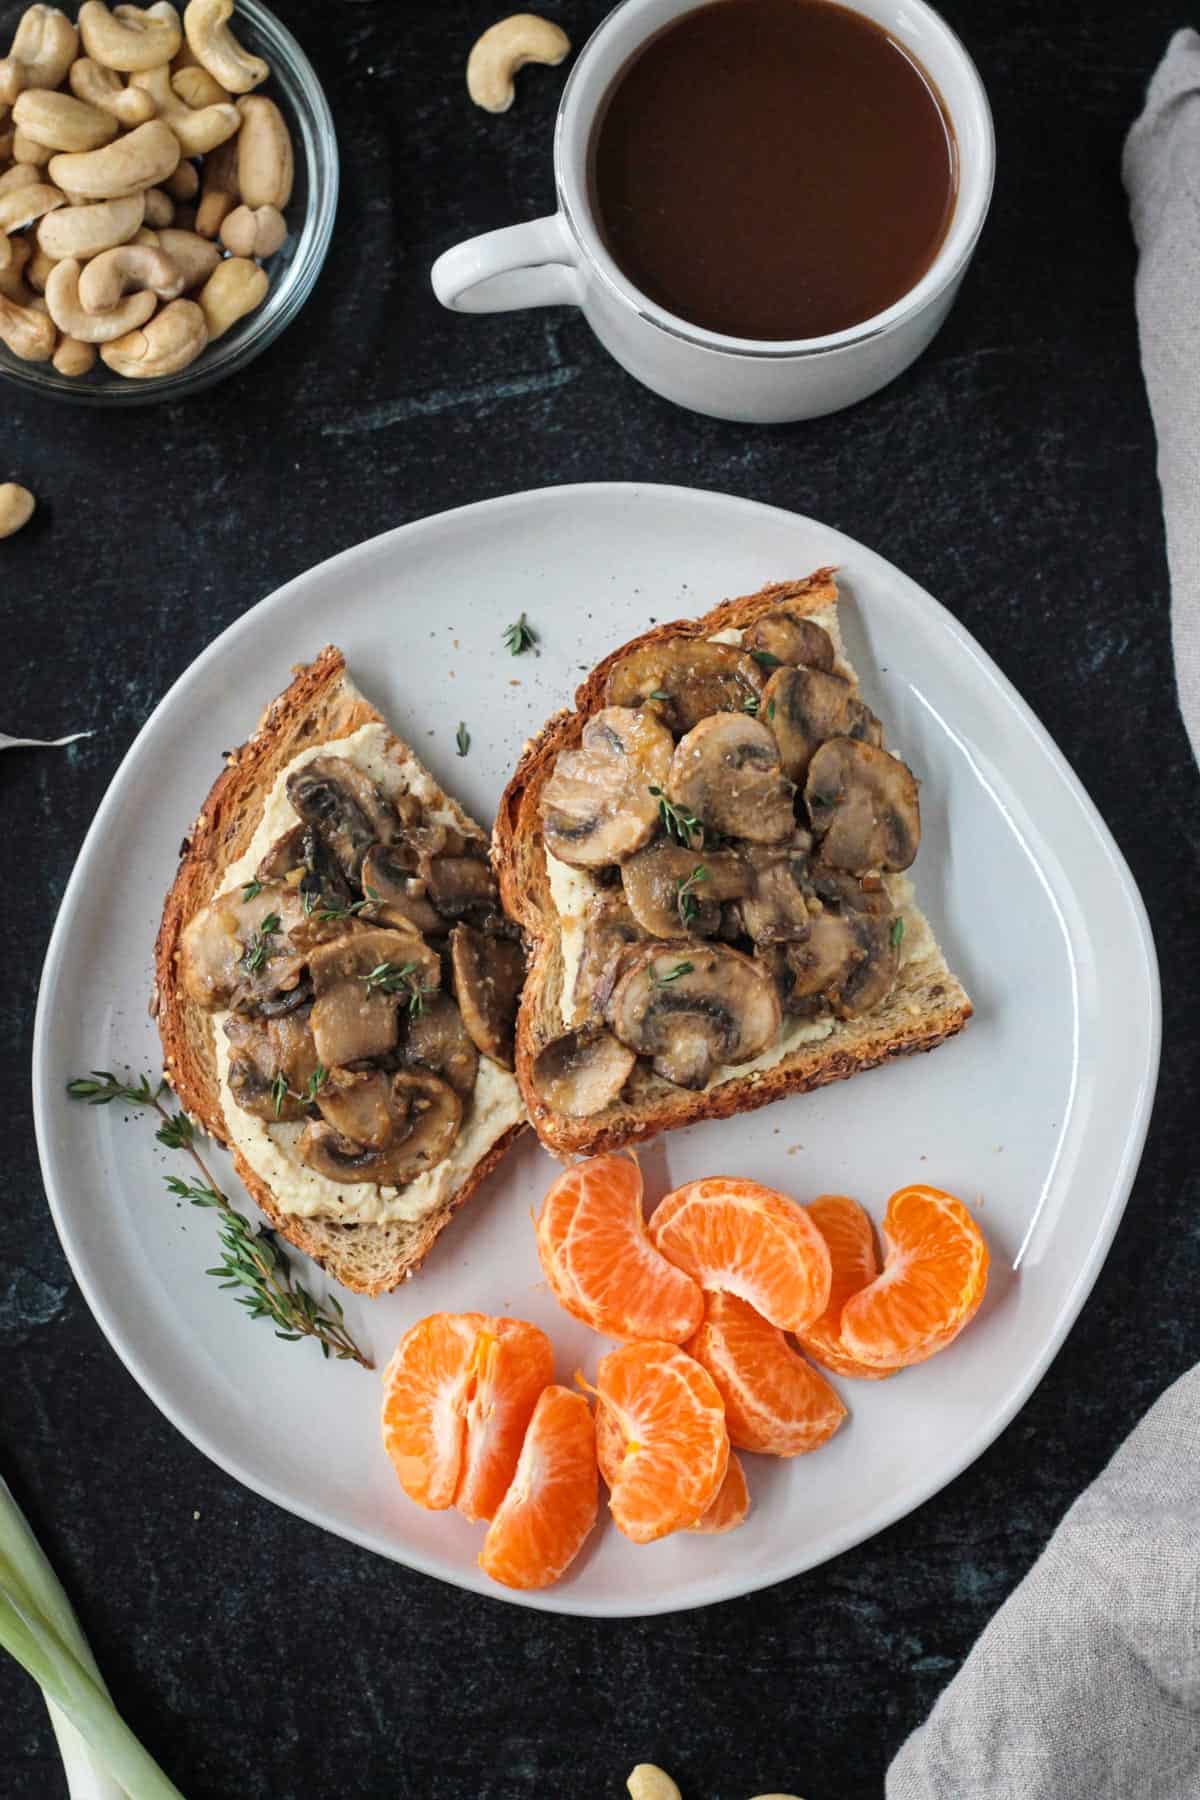 Two slices of creamy mushroom toast on a plate with a pile of orange segments.